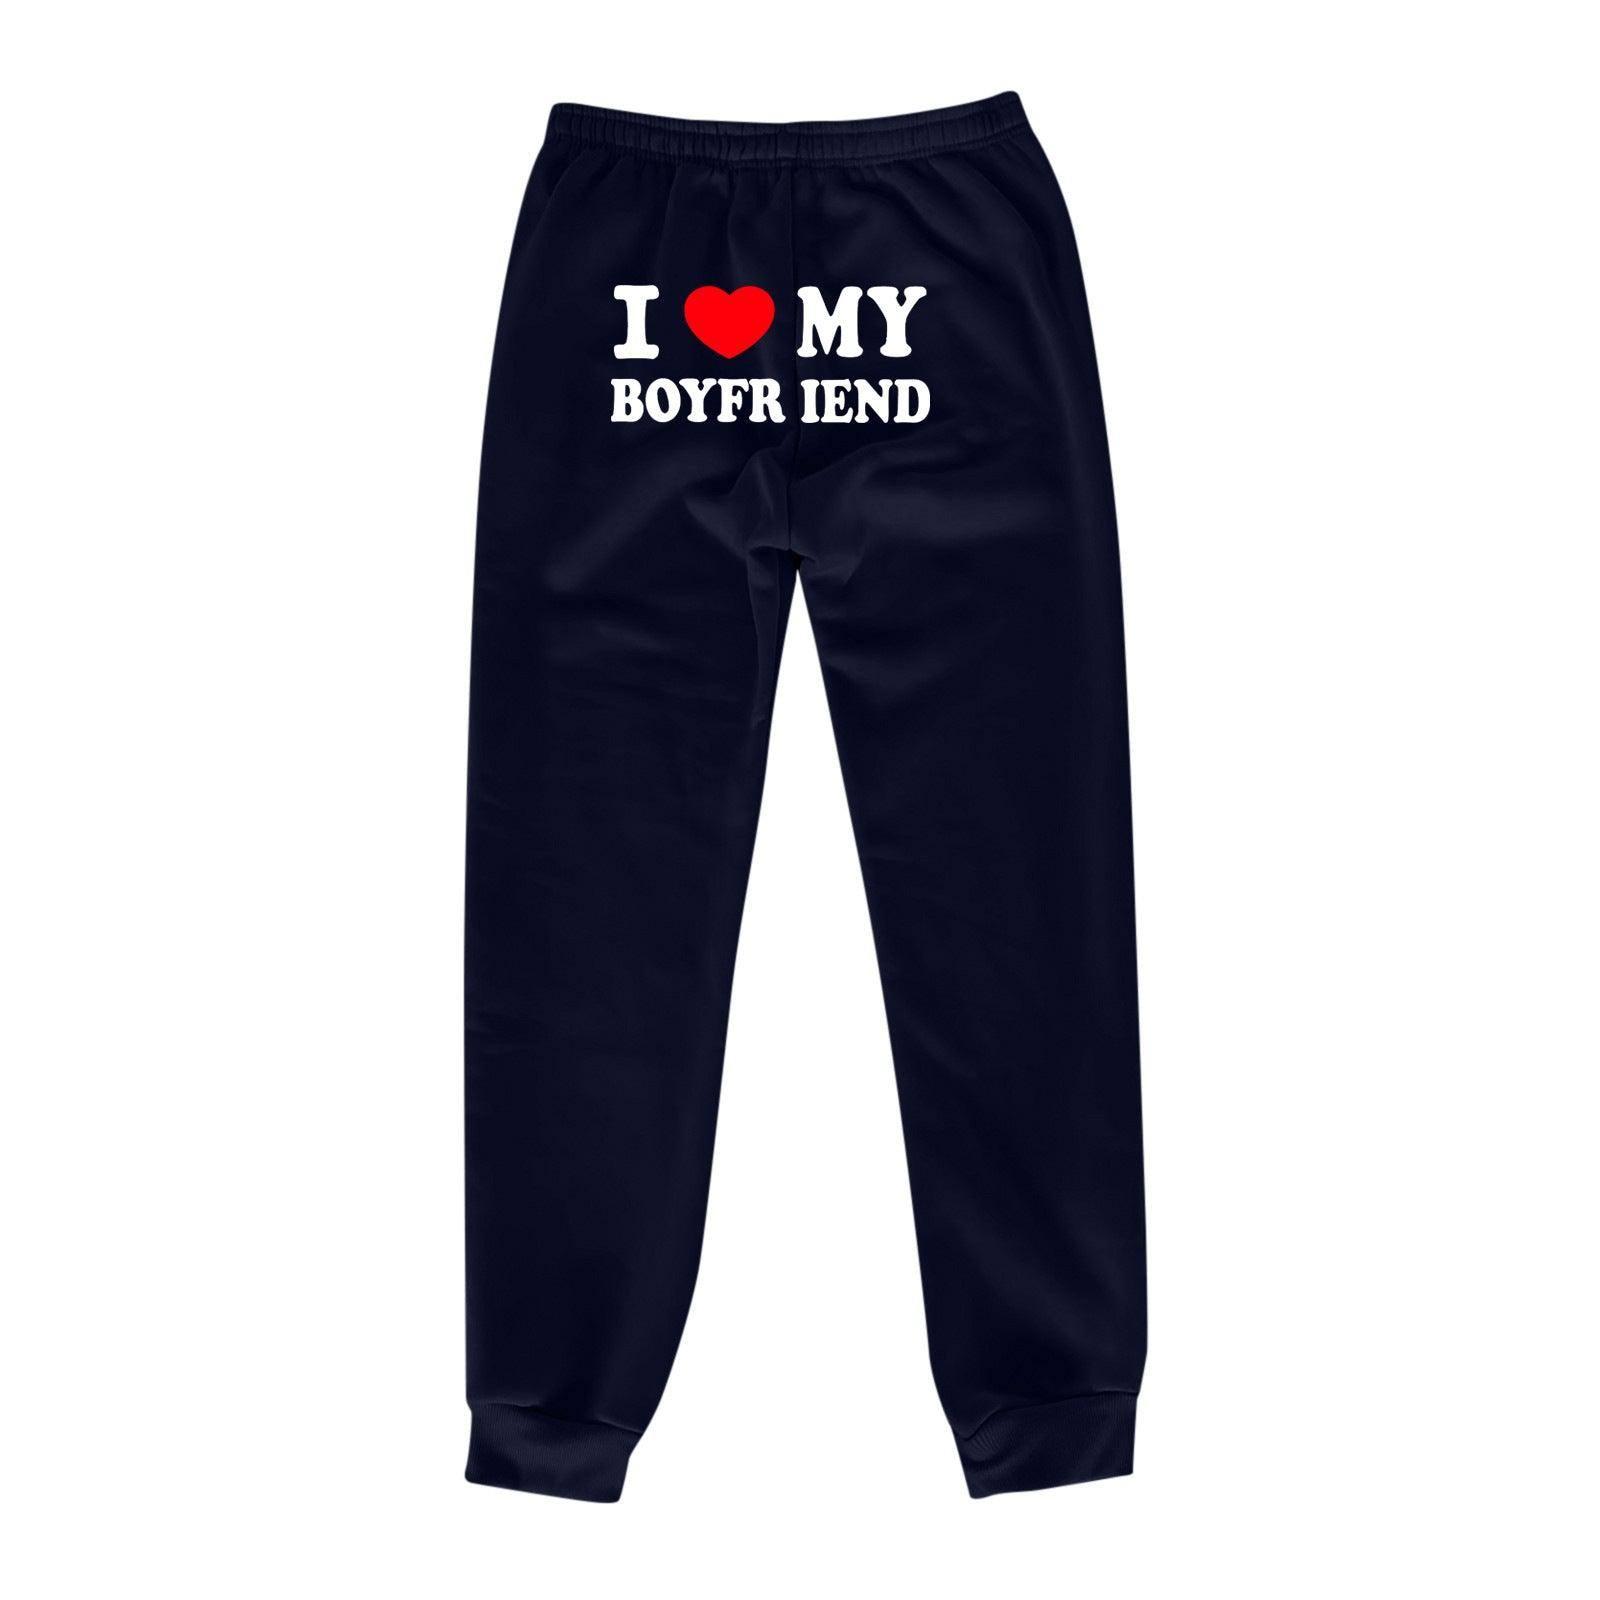 I Love MY BOYFRIEND Printed Trousers Casual Sweatpants Men-Navy Blue Back Picture-14